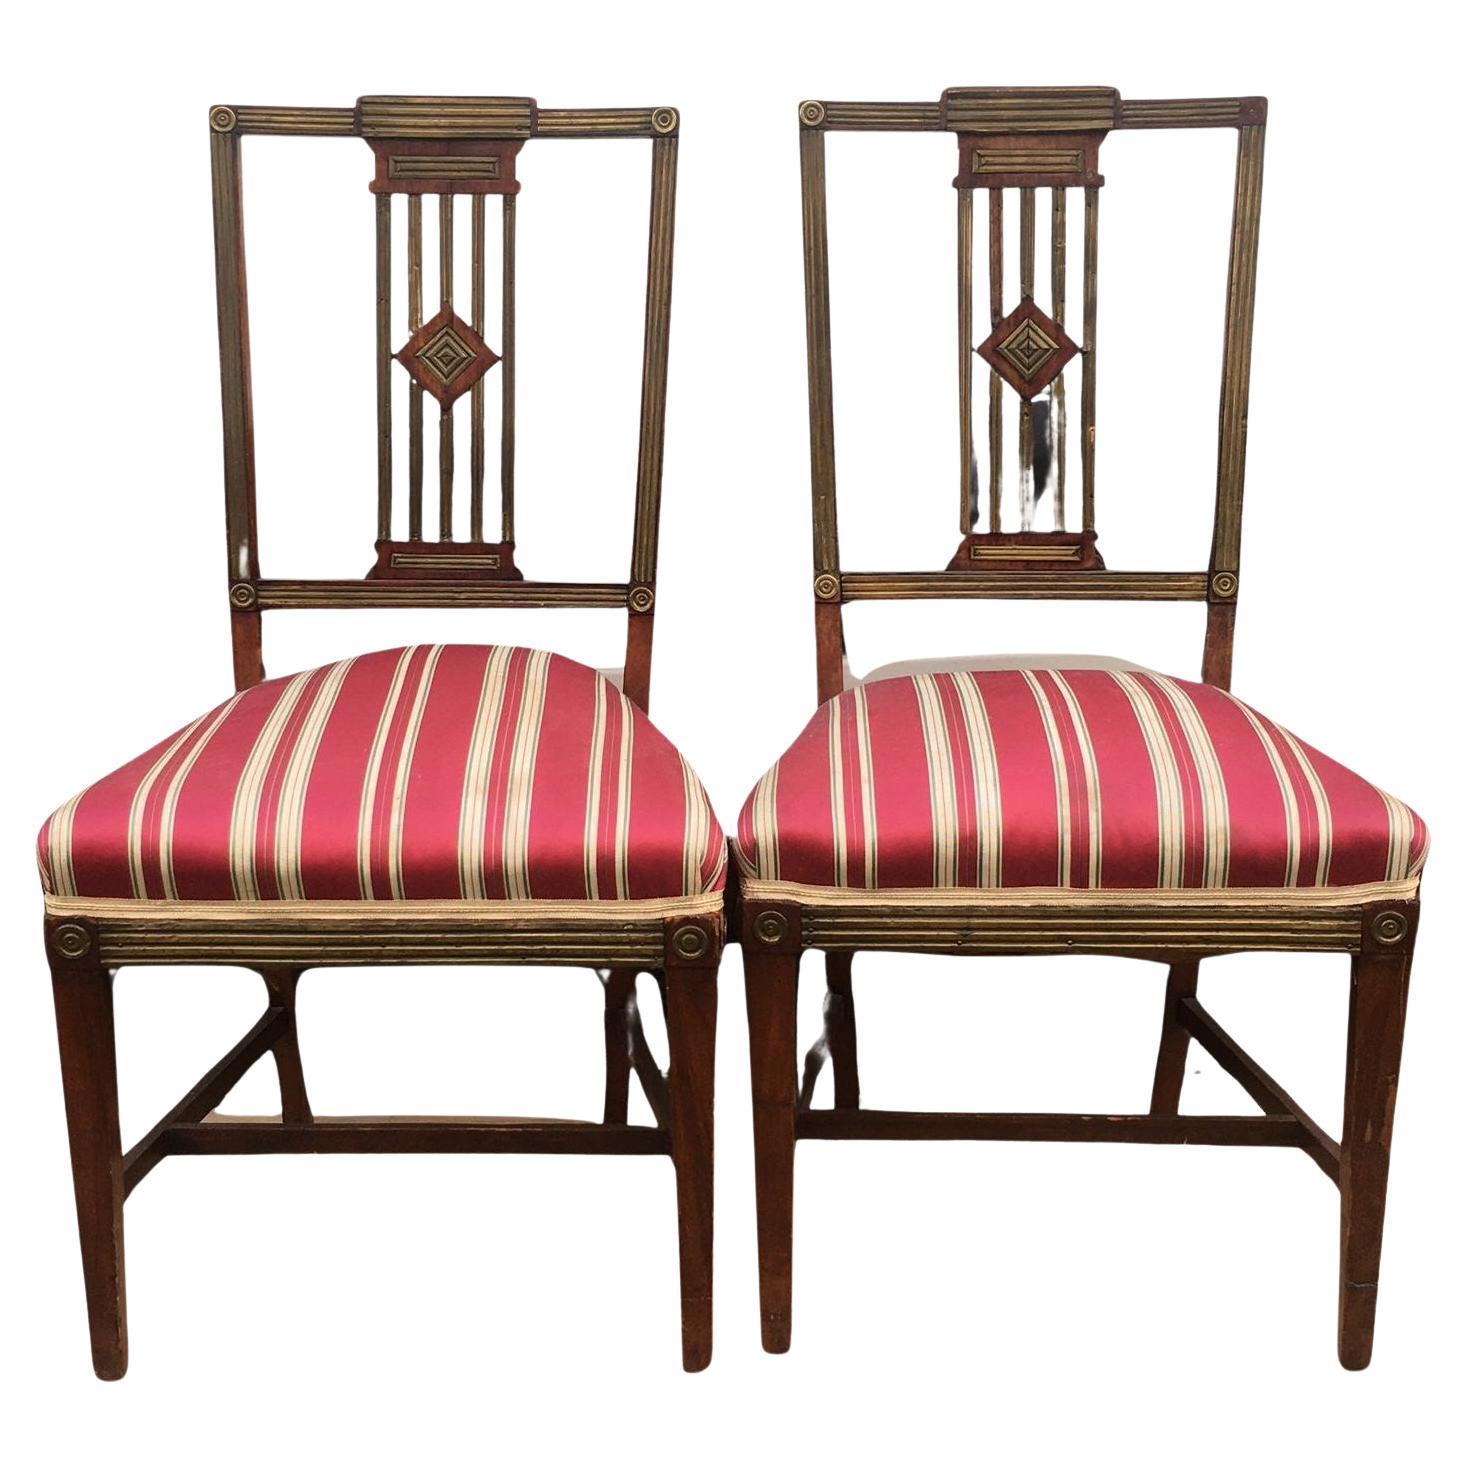 Pair of Russian Imperial Chairs